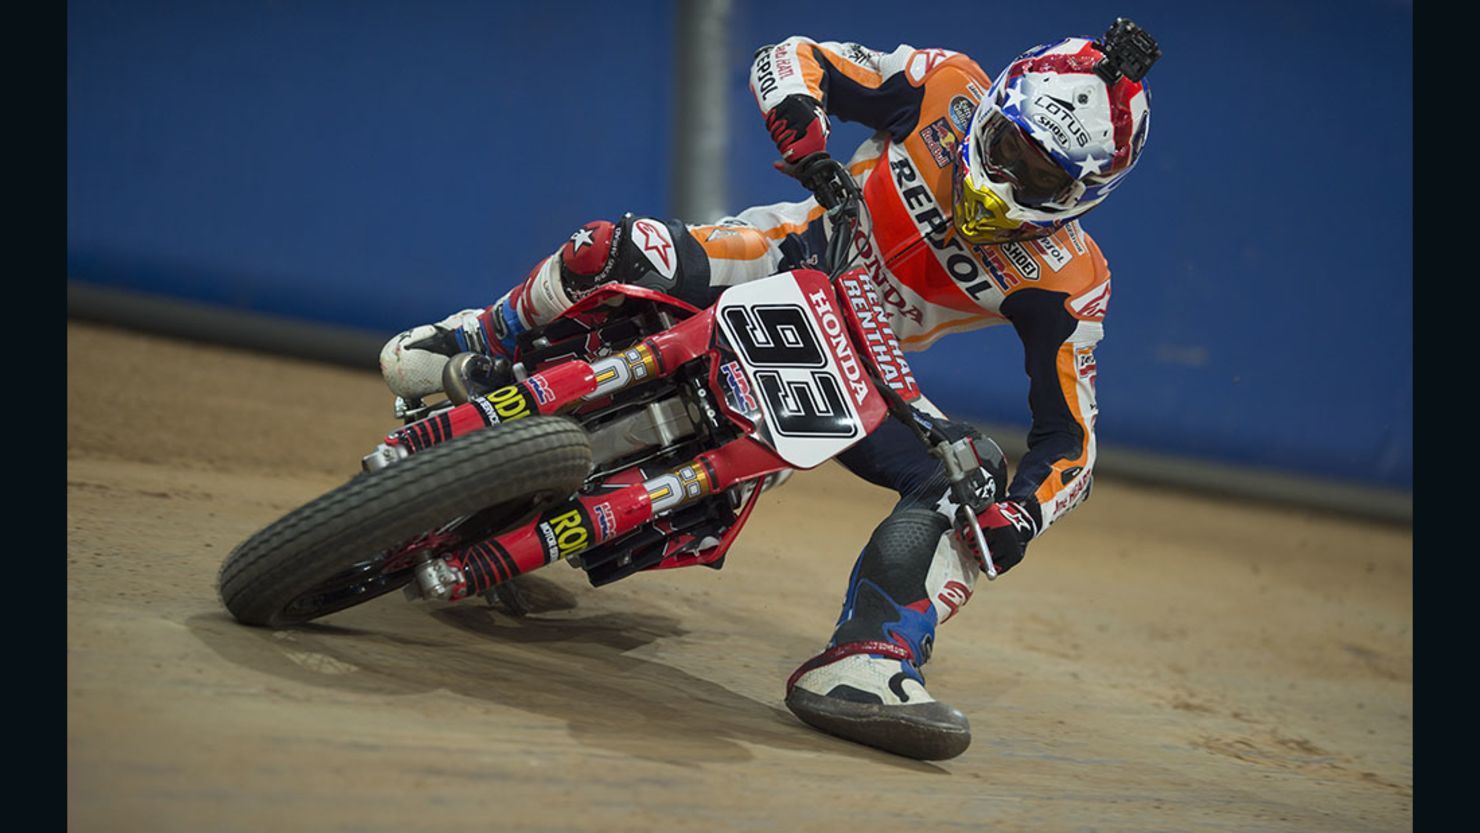 Marc Marquez is a keen dirt bike rider, bringing elements of dirt bike racing to his MotoGP riding style.